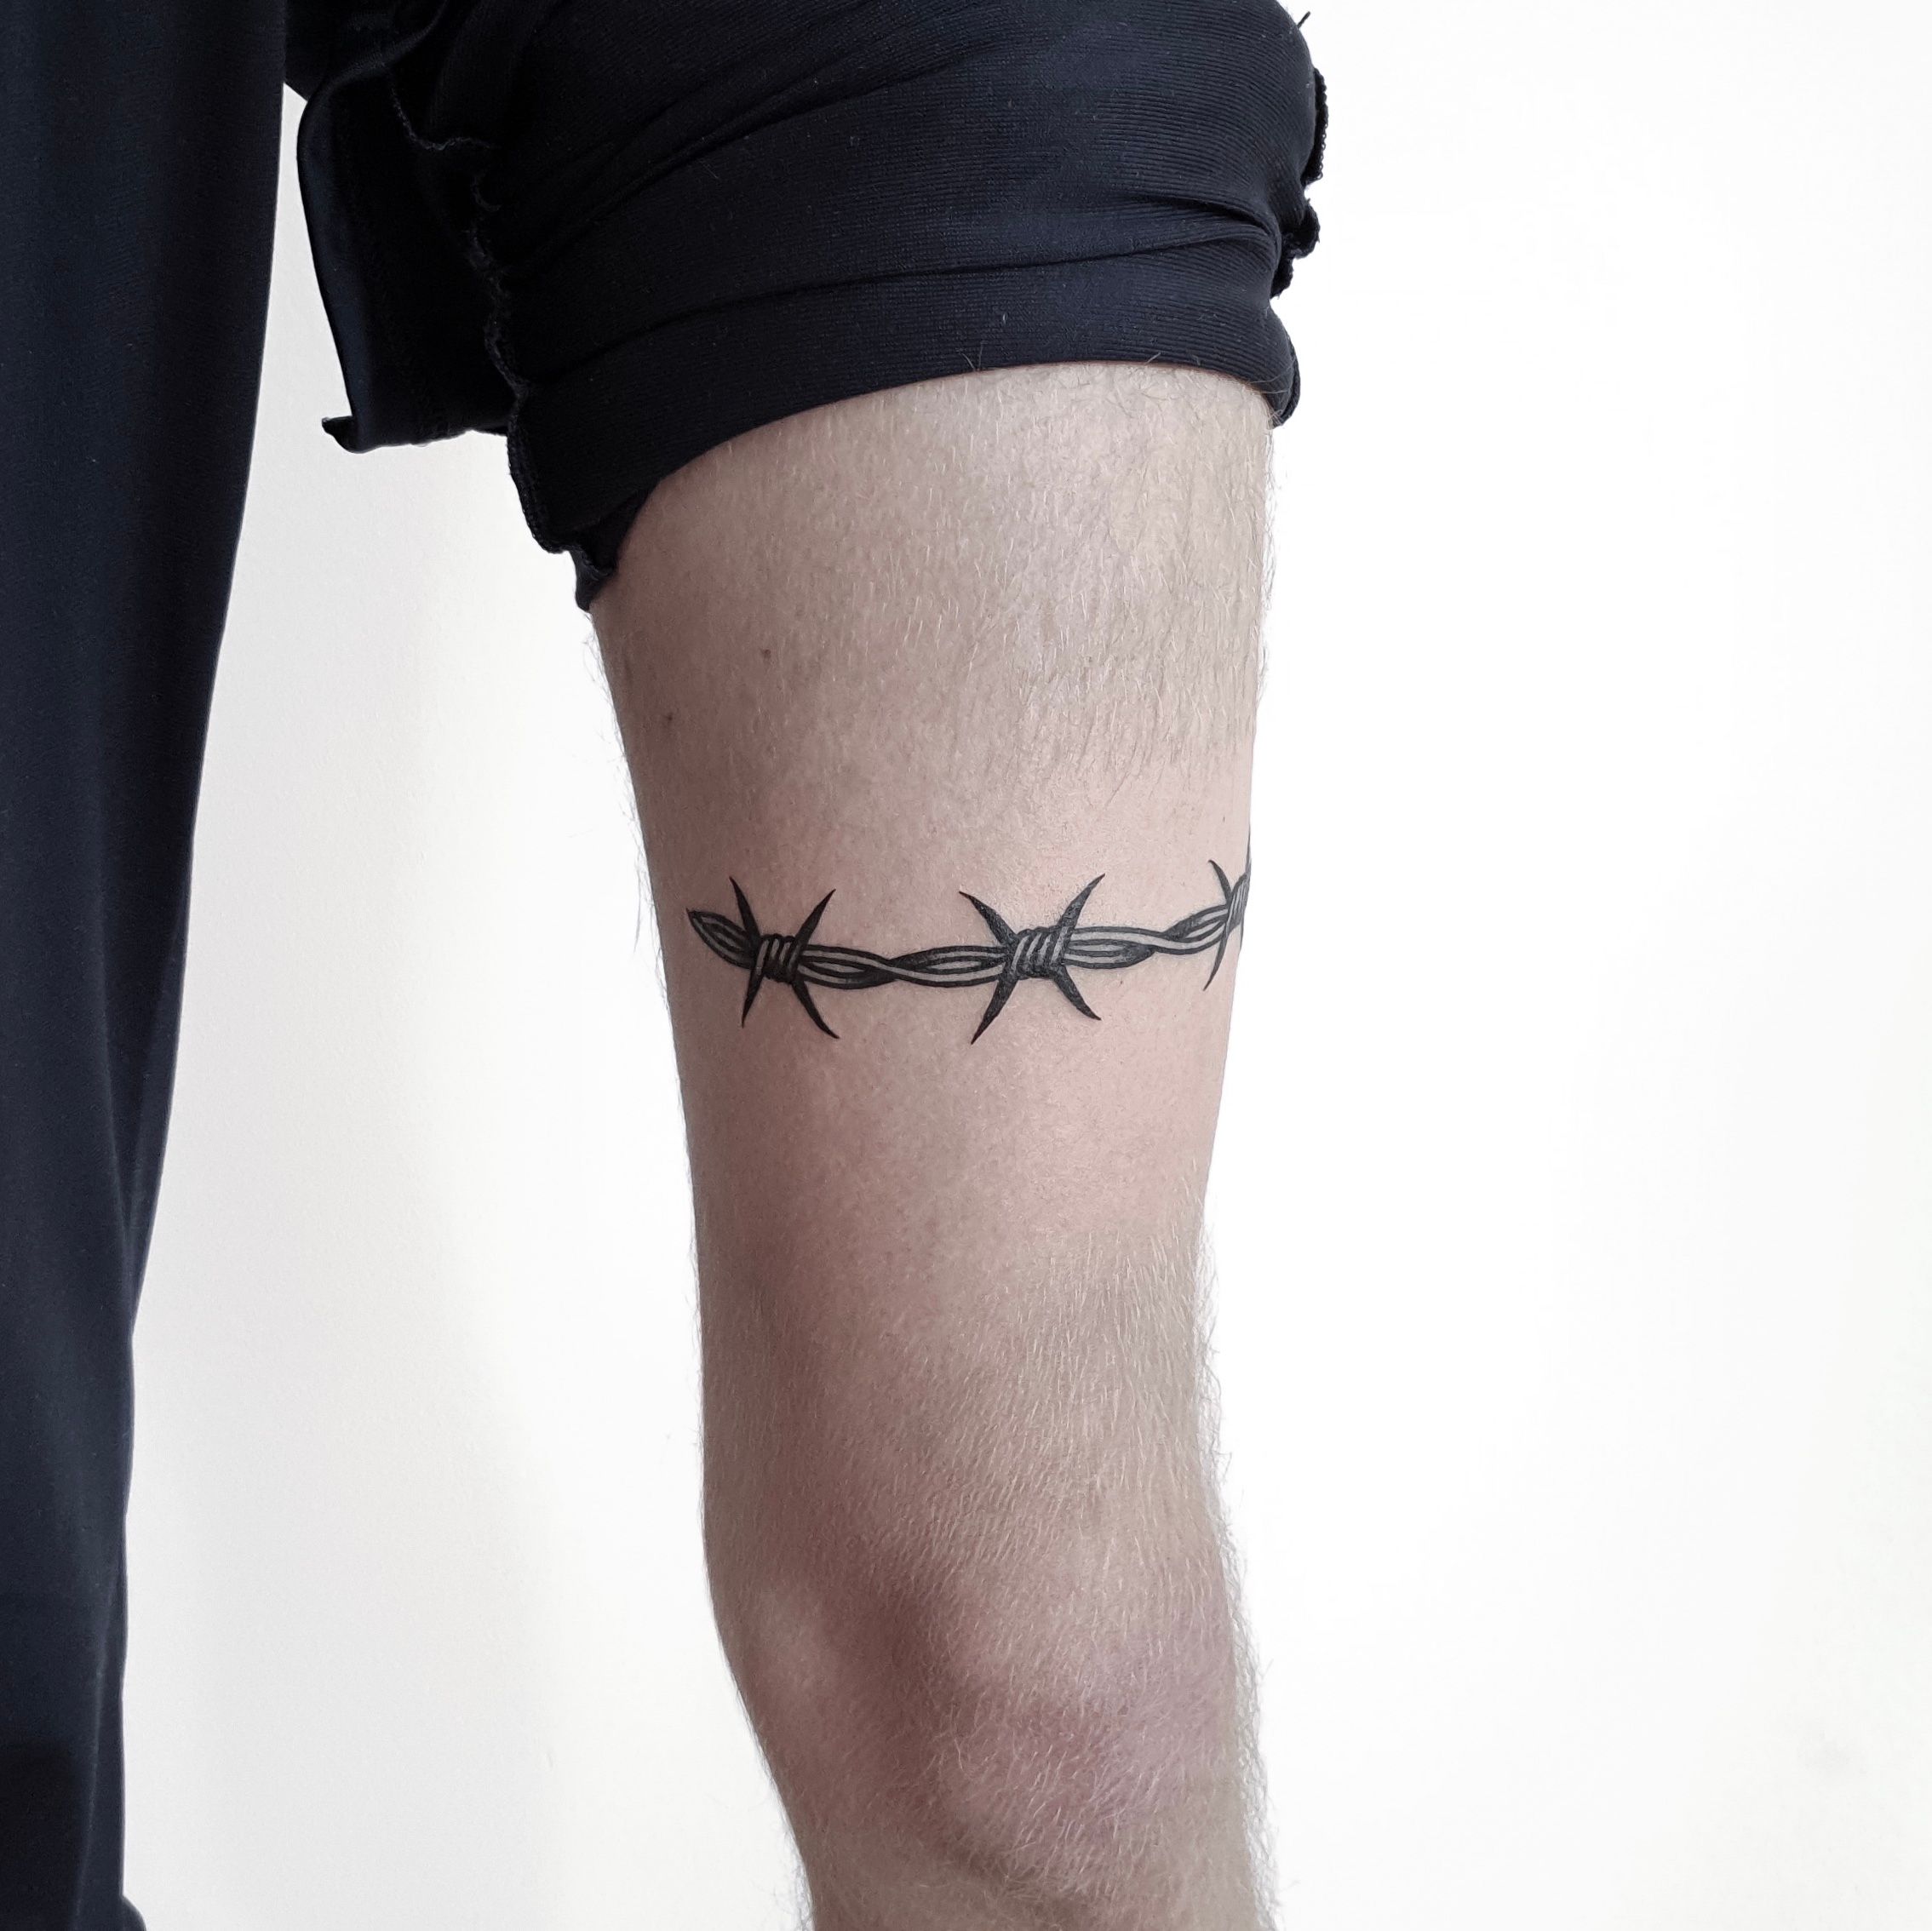 Under the knee barbed wire by me  rtraditionaltattoos